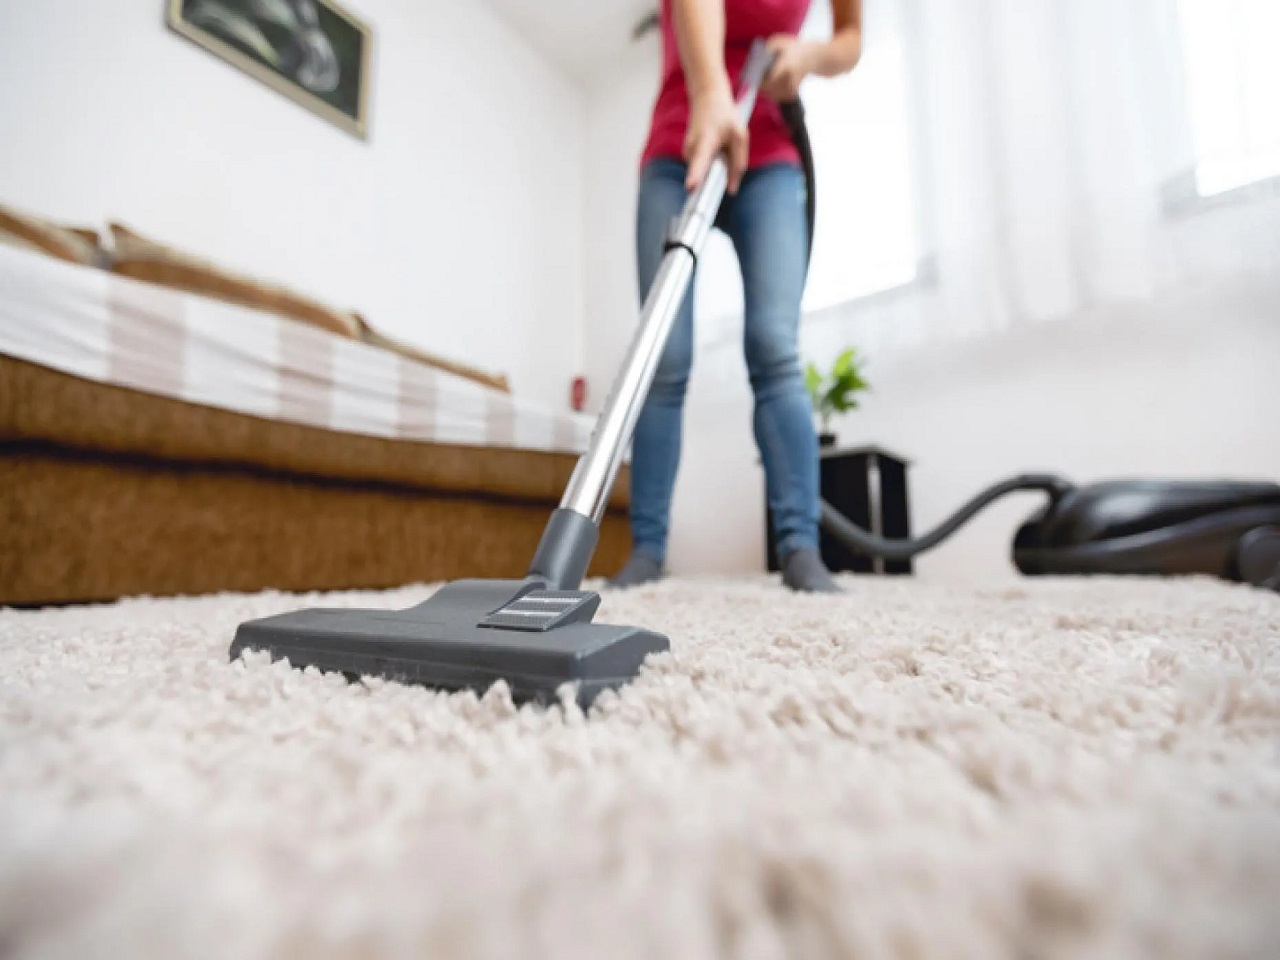 How do you clean wool rugs at home?